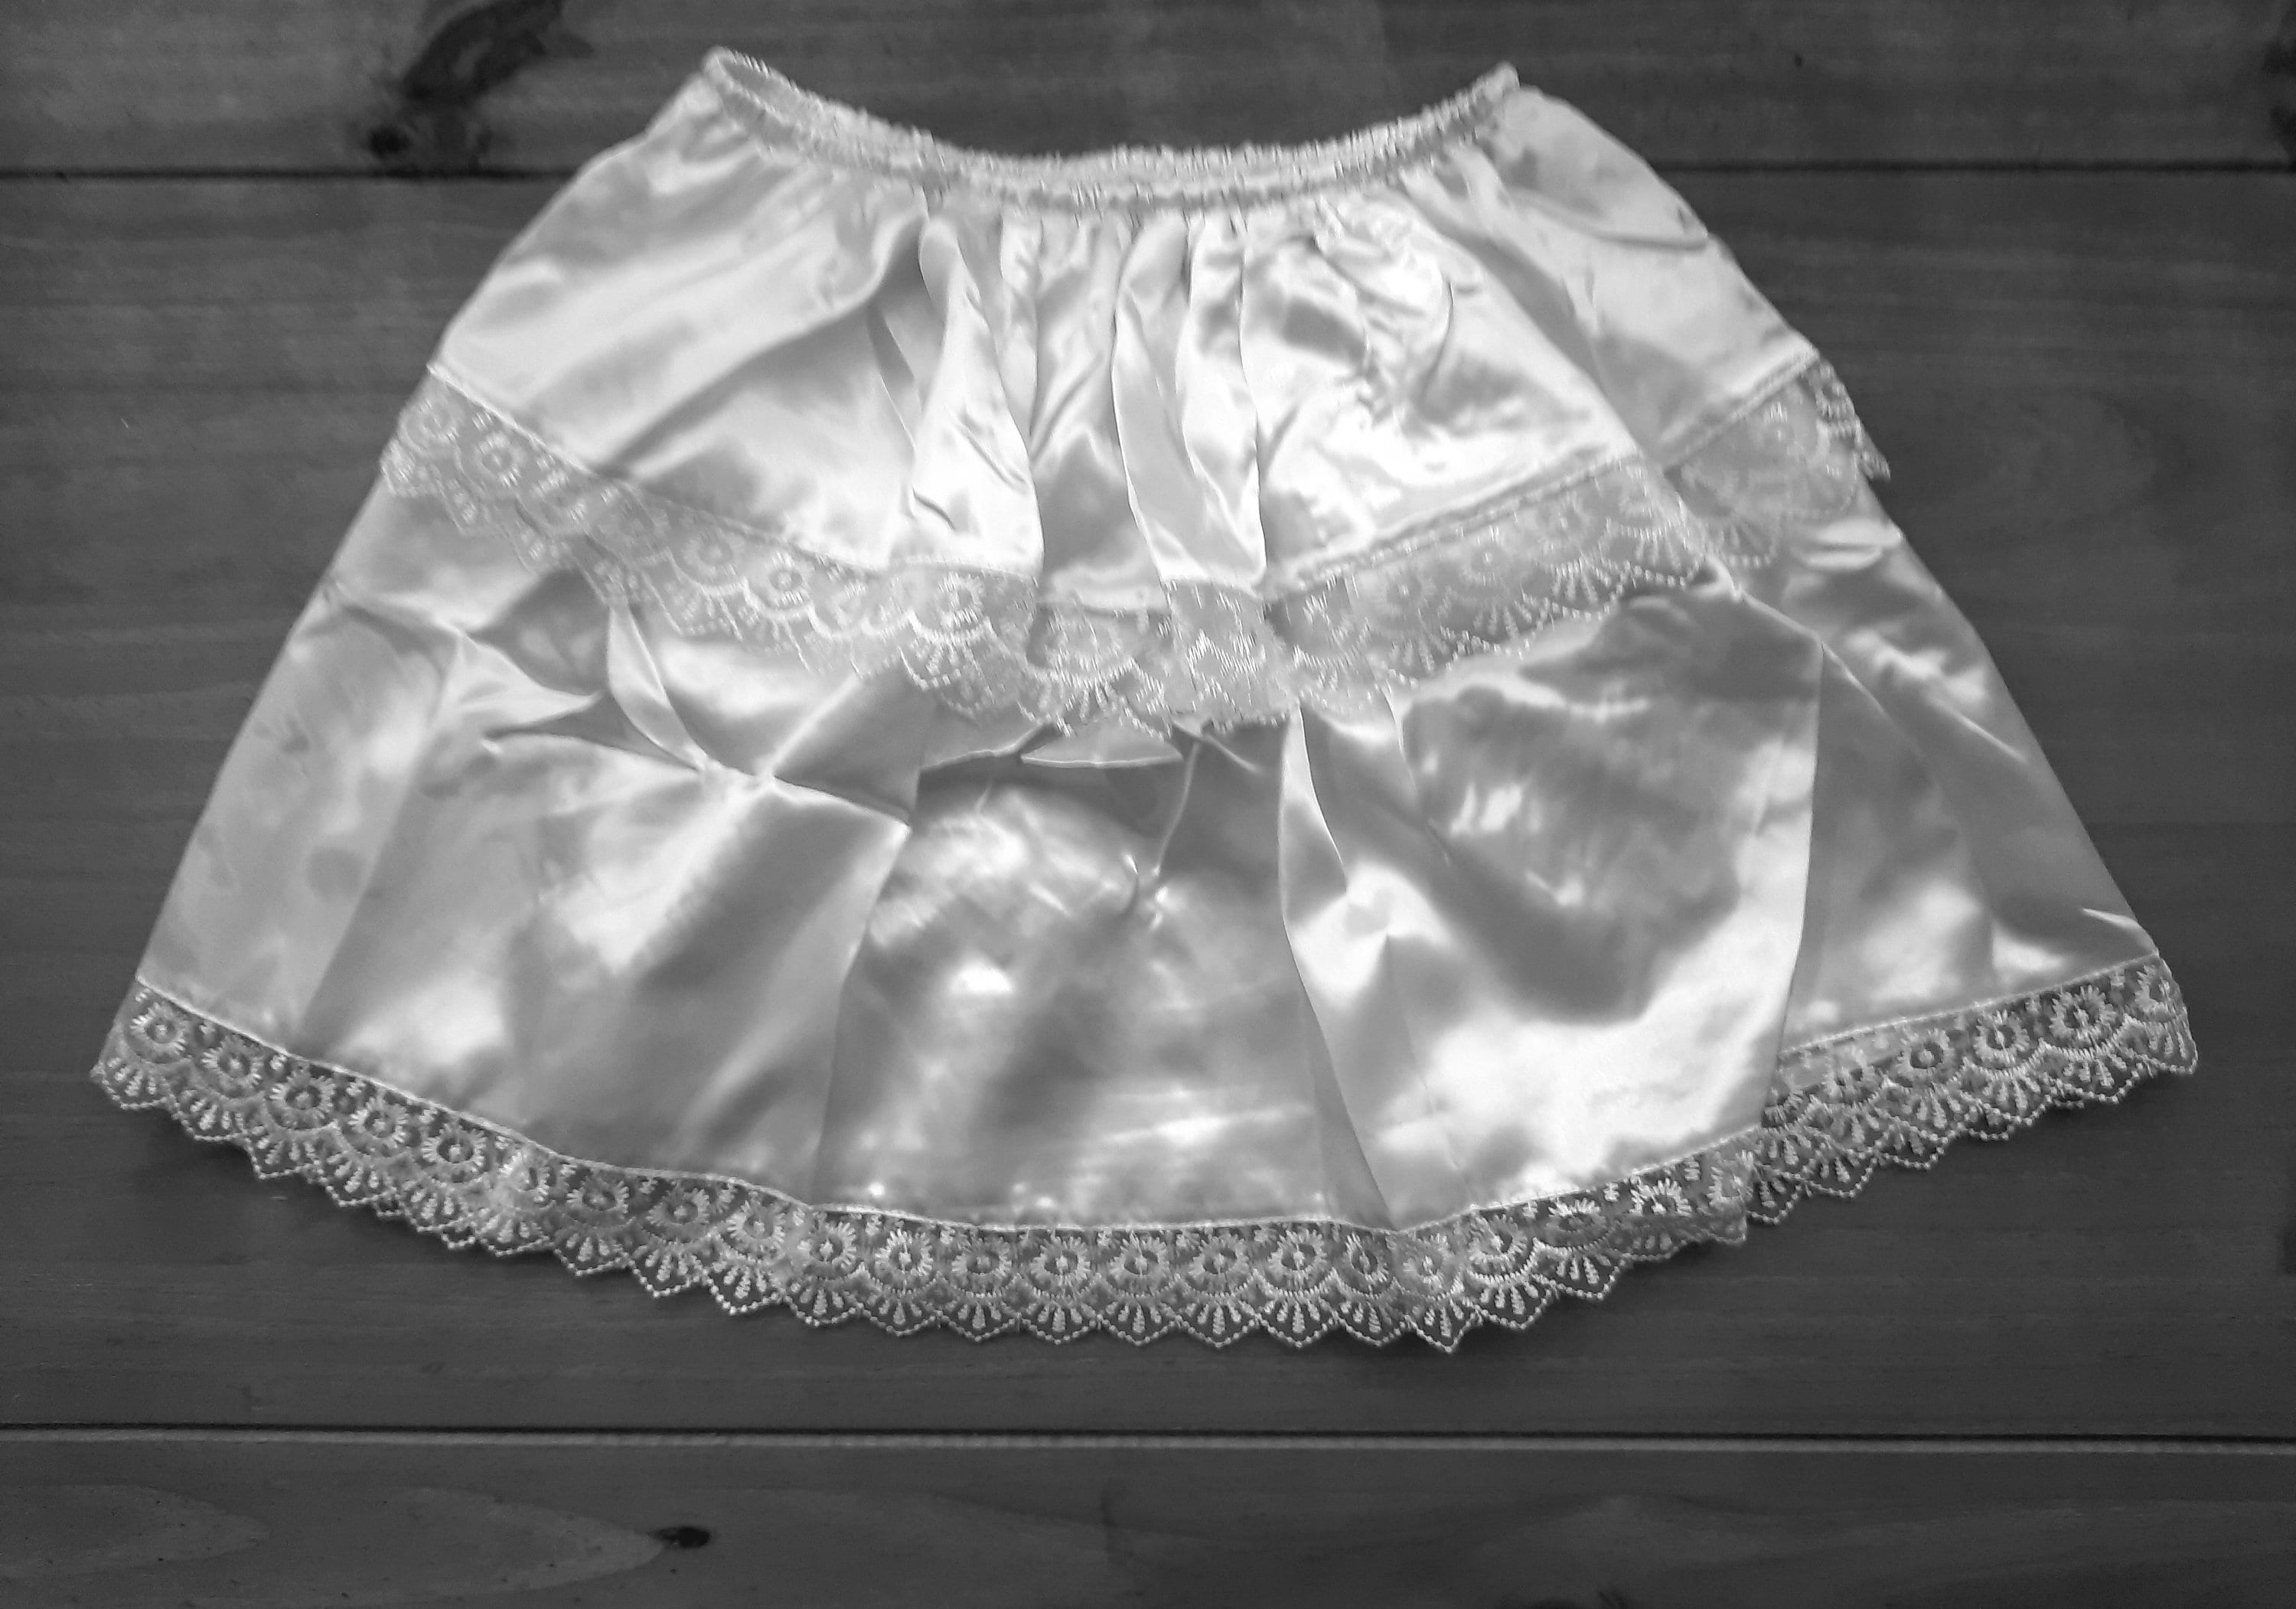 Natural Silk Shorts With Lace, Pajama, Sexually Wrap Shorts, Sleepwear  Lingerie, Bridesmaids Gift for Woman, White, Wedding Underwear, Satin 